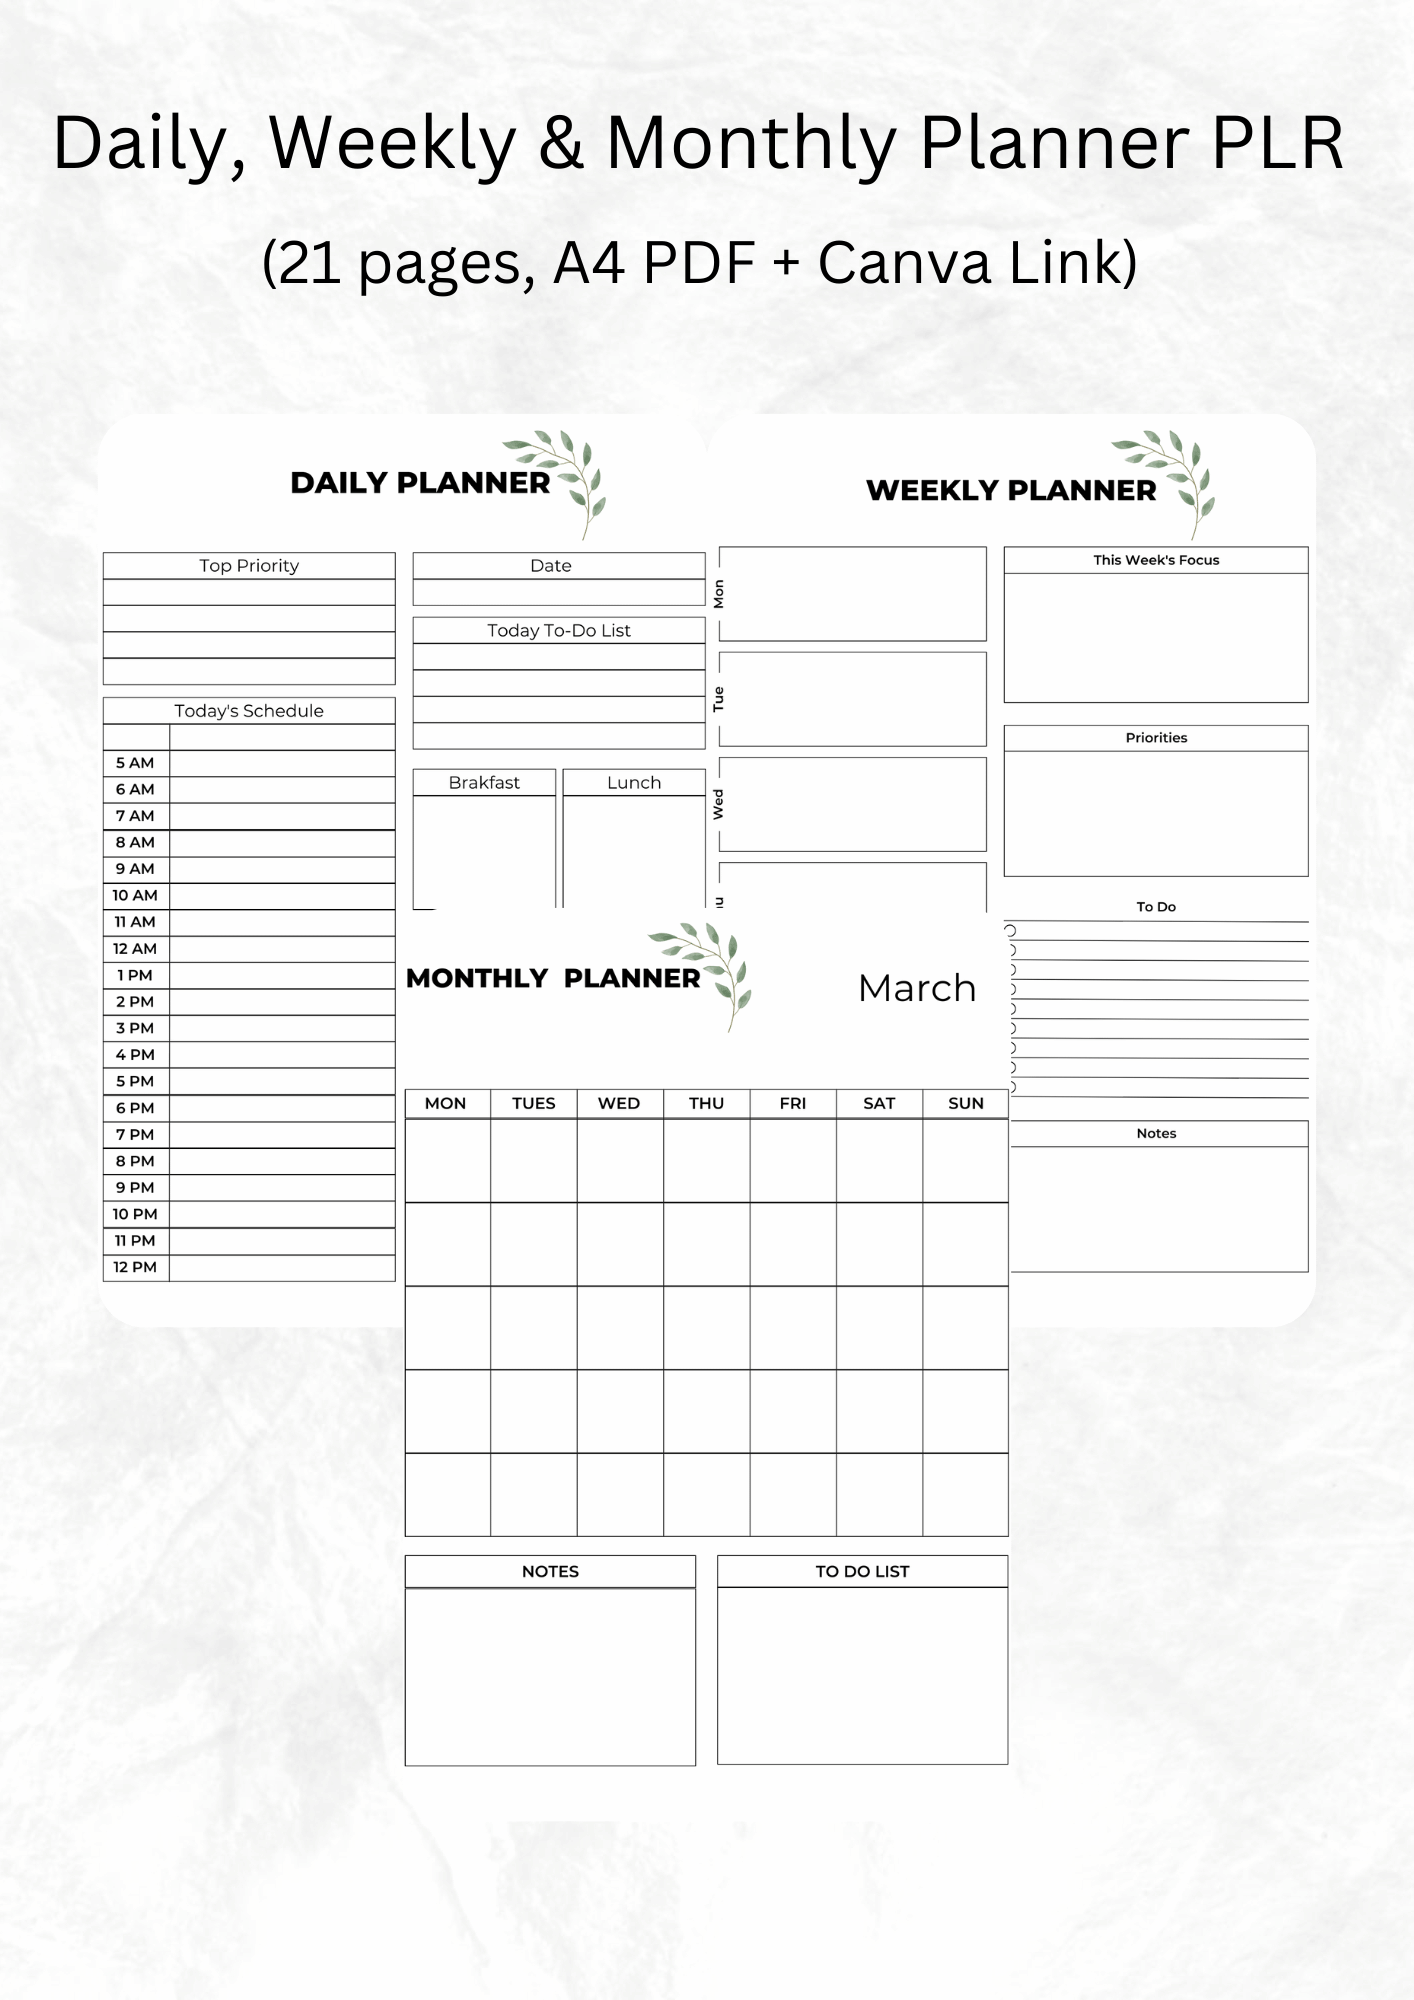 Daily, Weekly & Monthly Planner